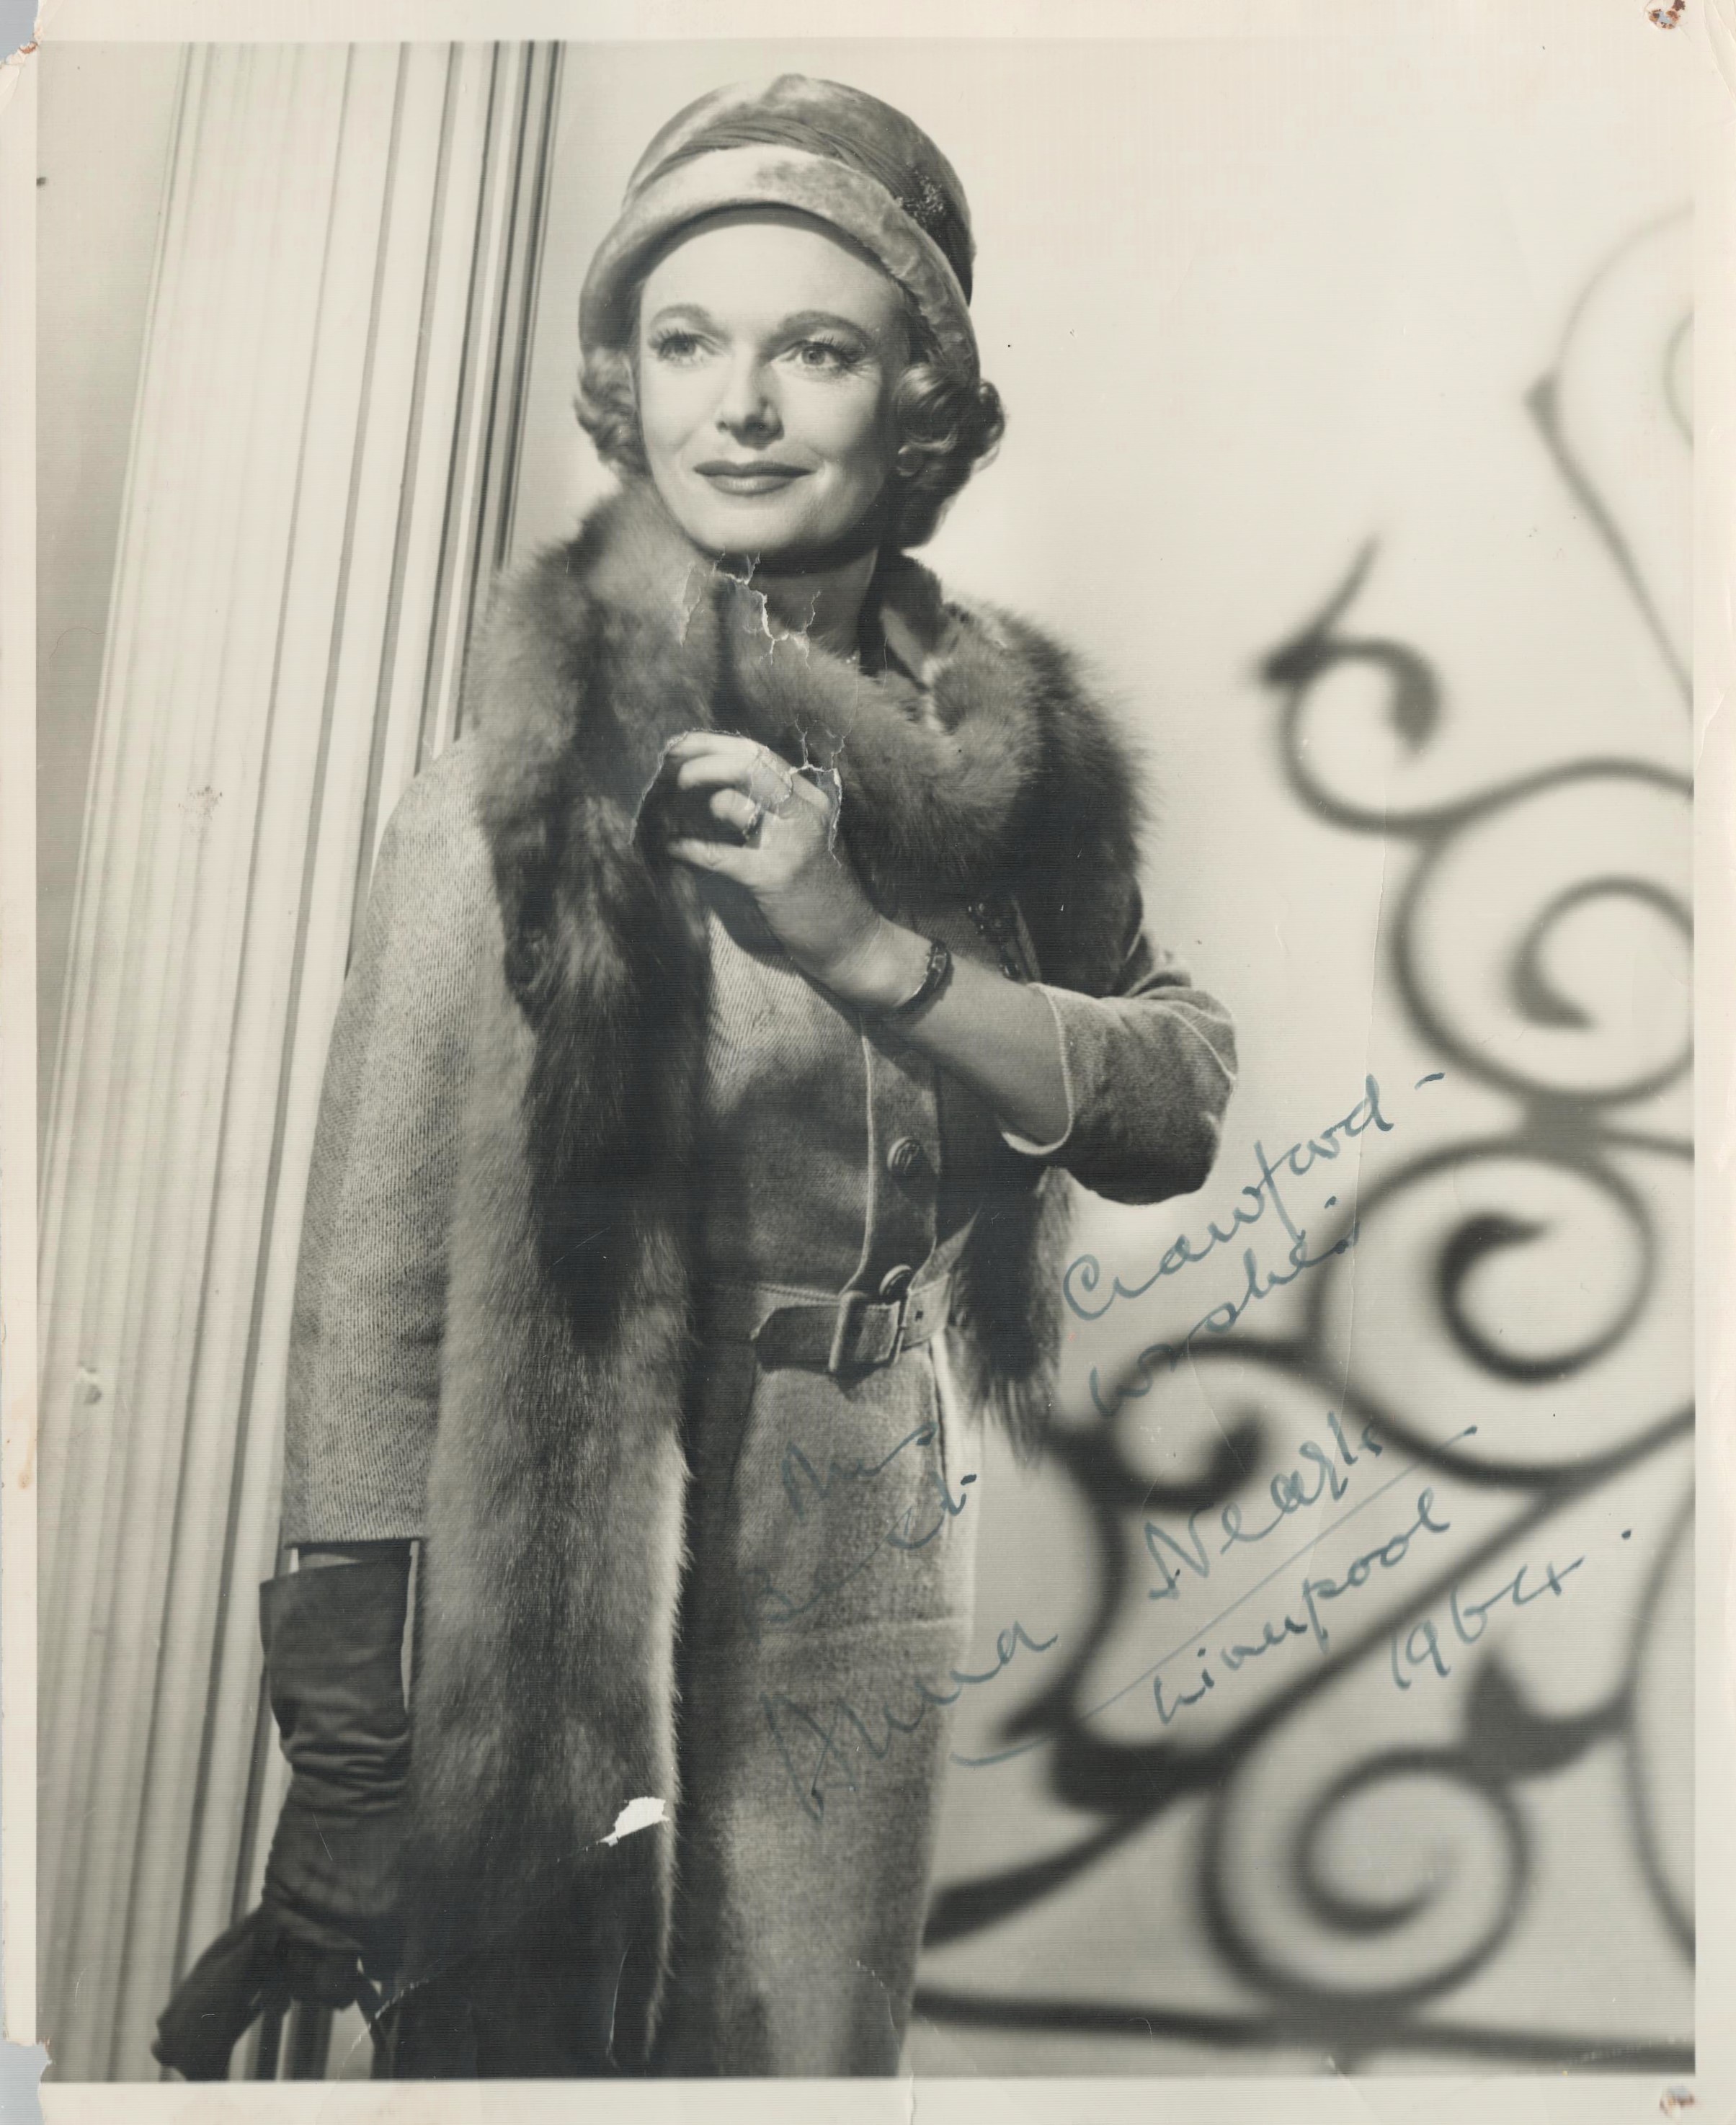 Anna Neagle signed 10x8inch black and white photo. Few knocks and marks to photo caused by age.